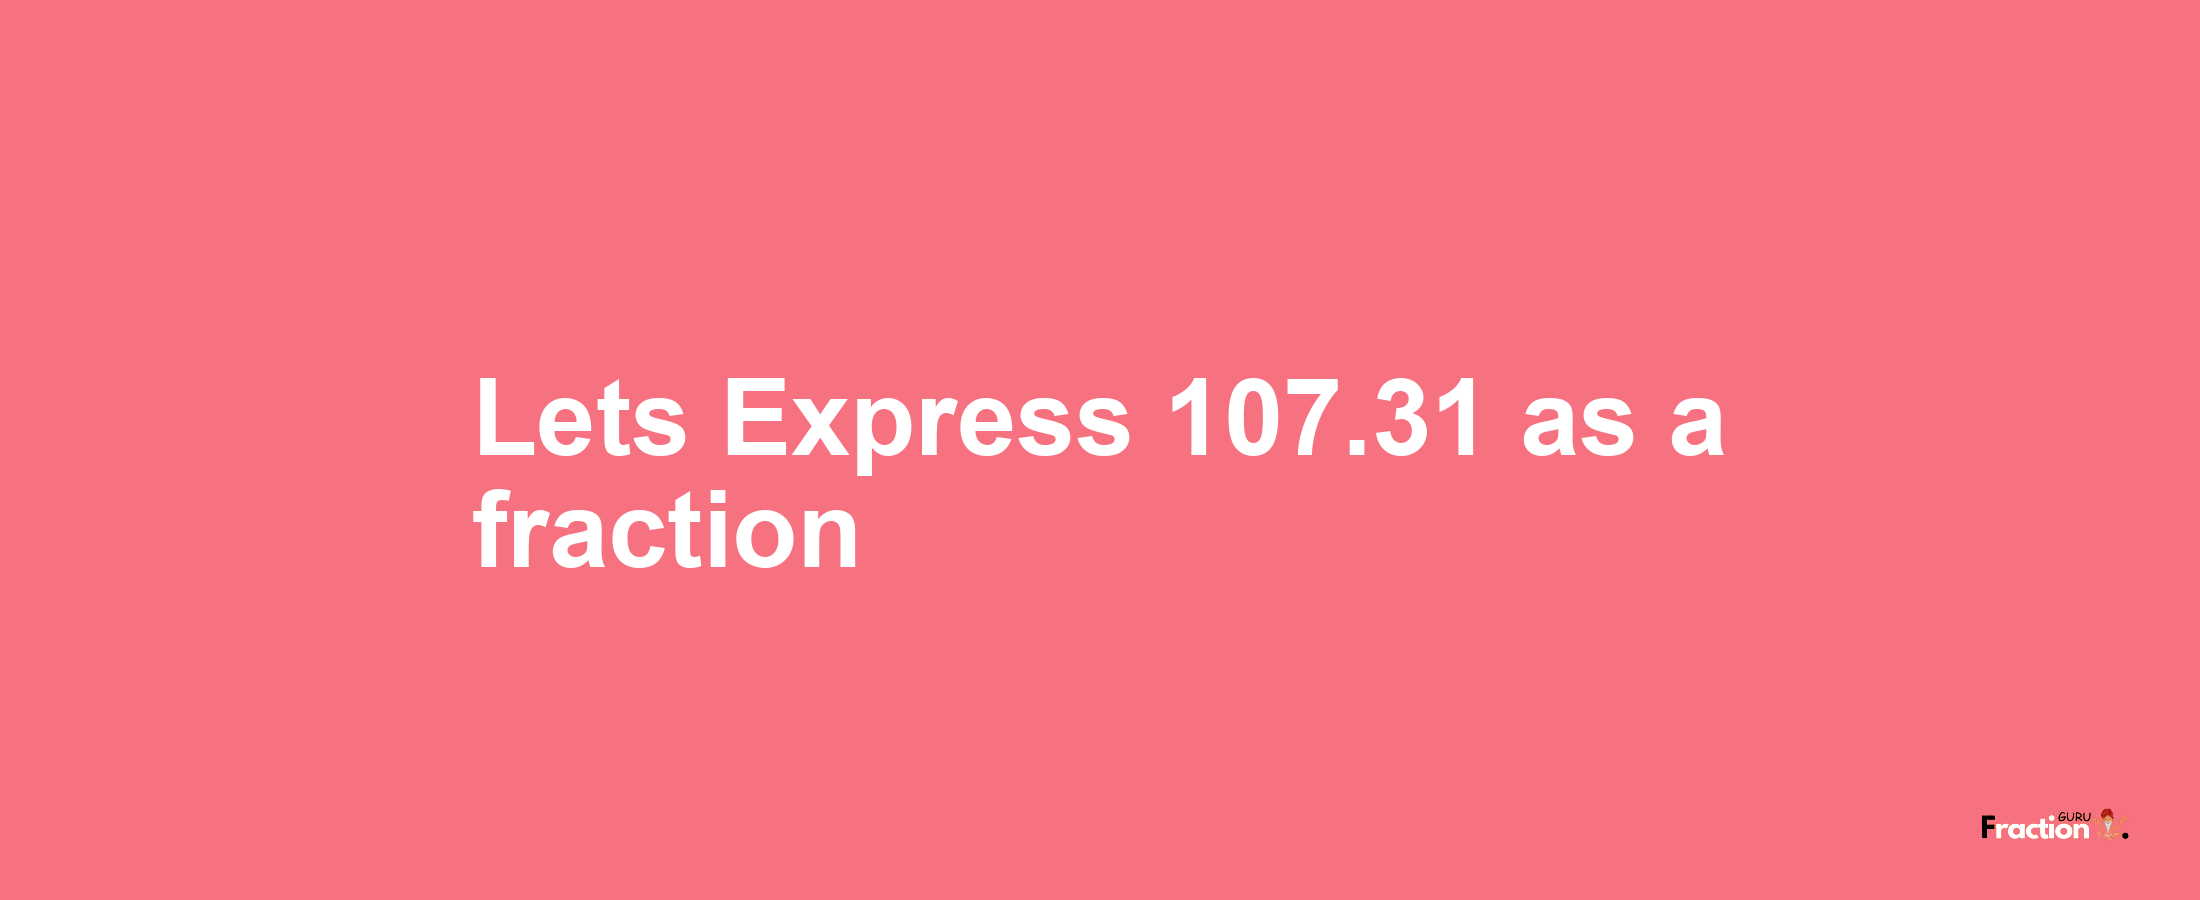 Lets Express 107.31 as afraction